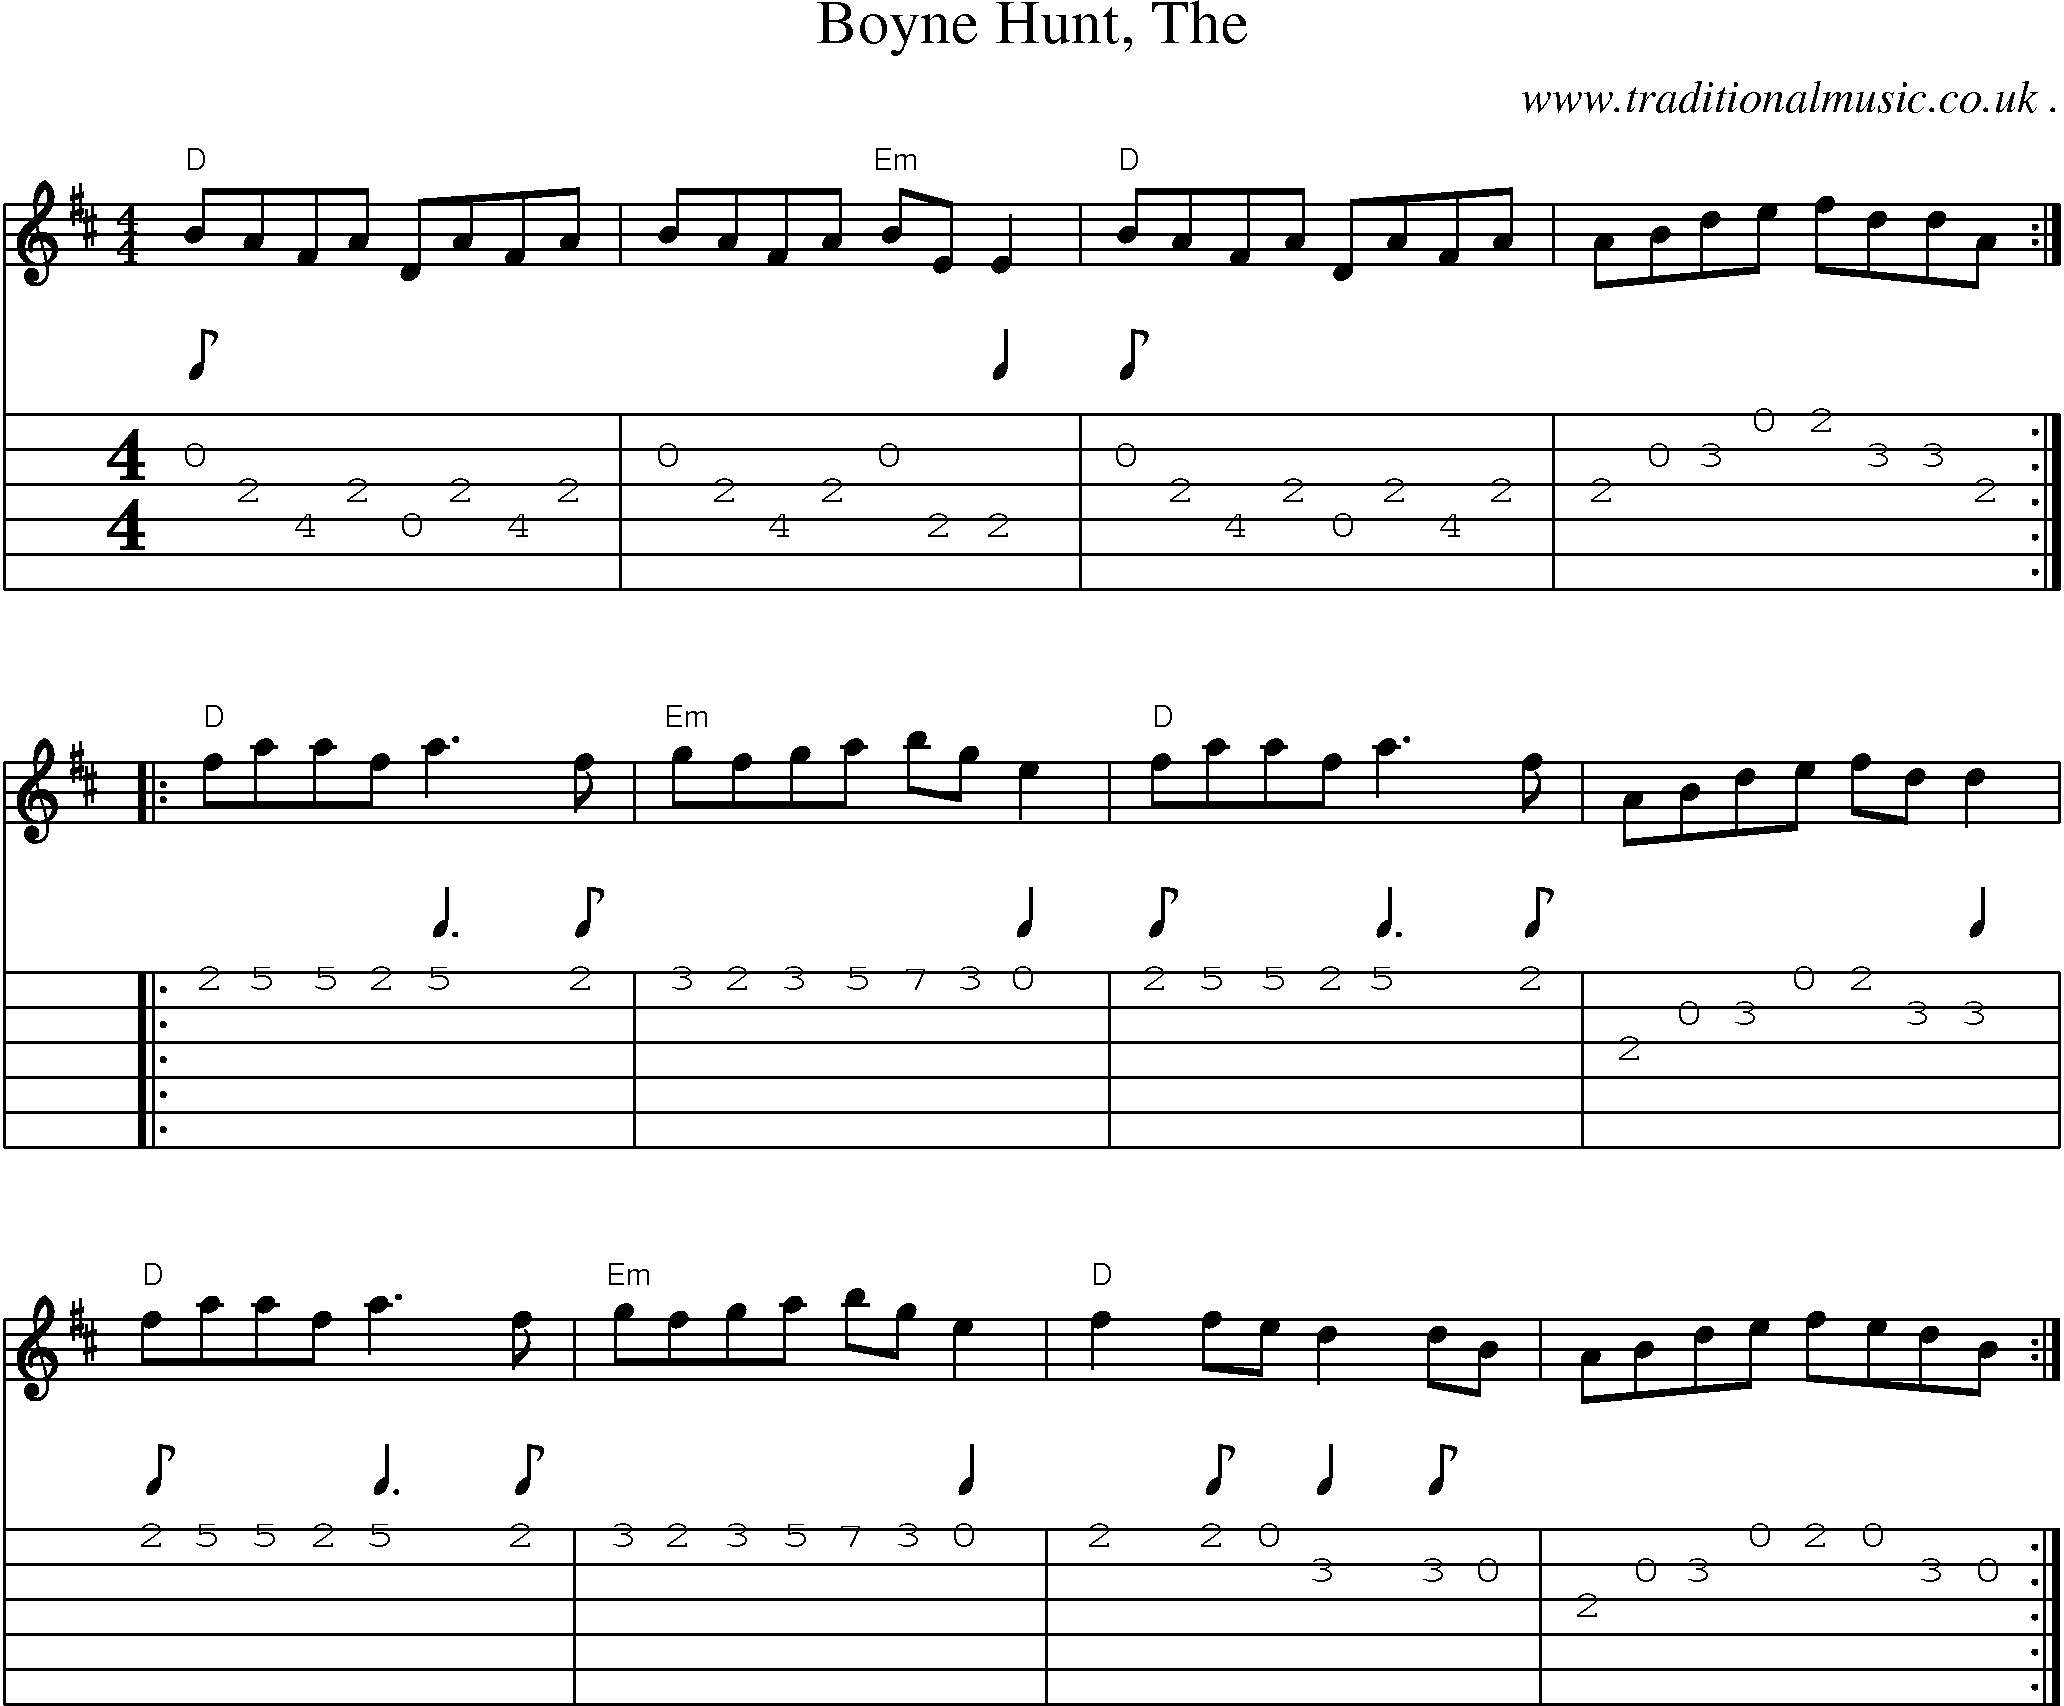 Music Score and Guitar Tabs for Boyne Hunt The